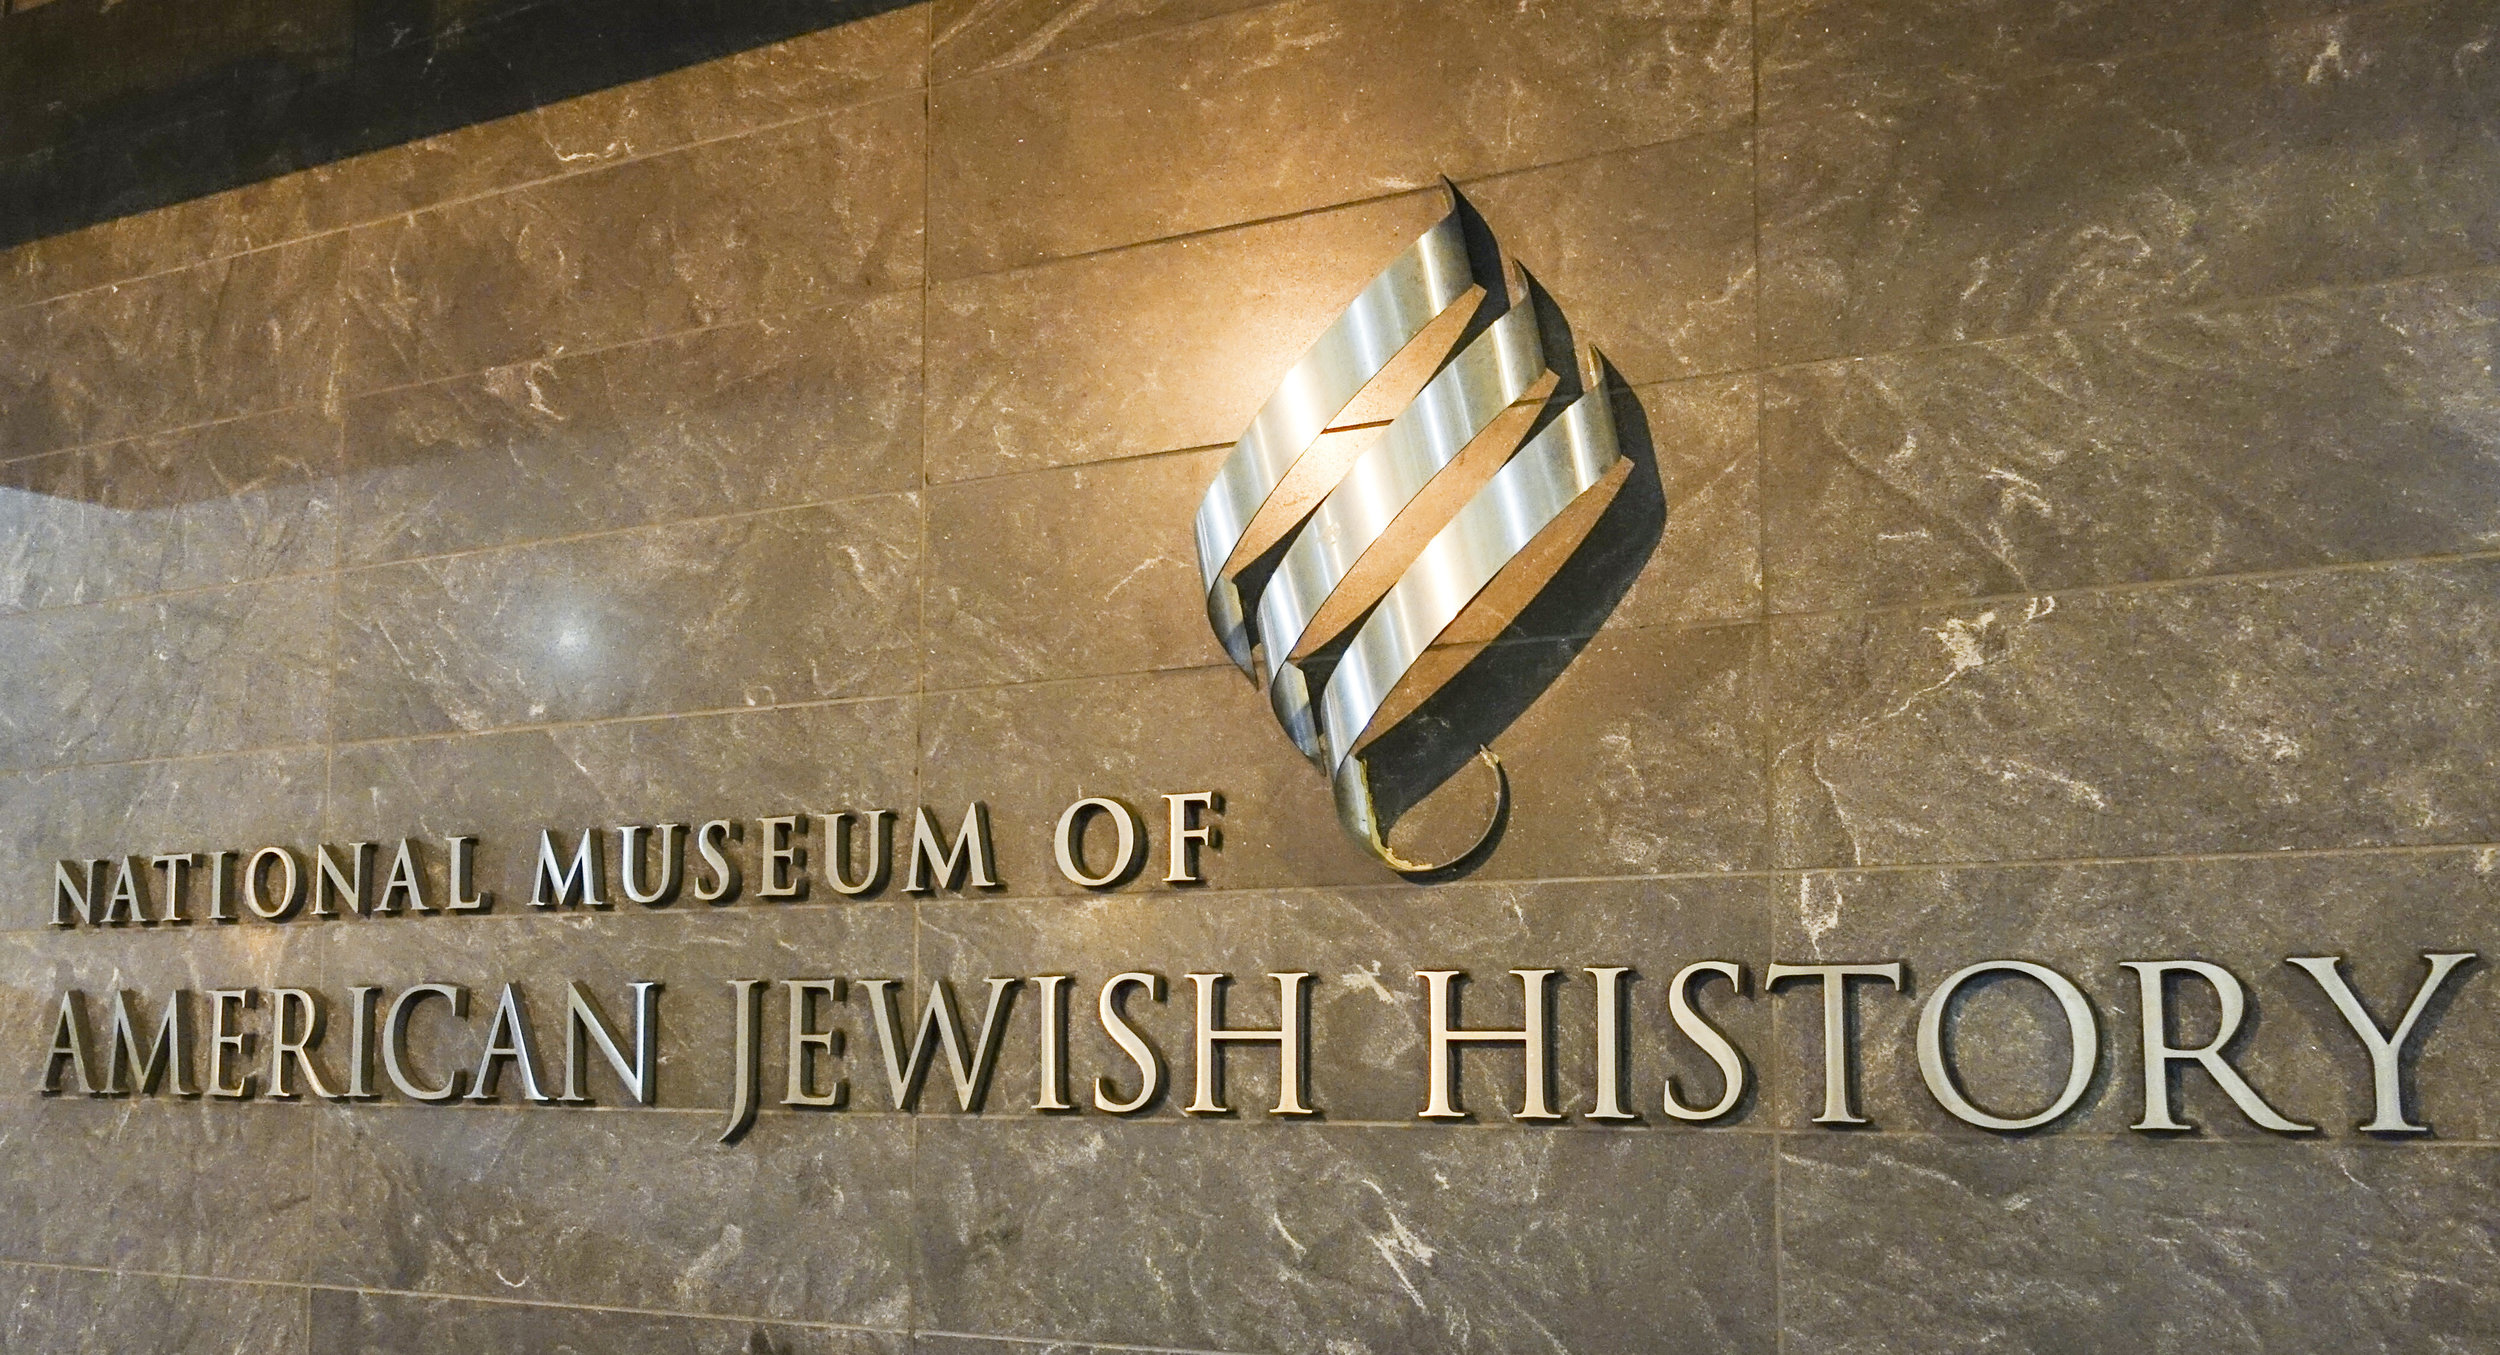 The National Museum of American Jewish History is one organization supported by the Millers. 4kclips/shutterstock